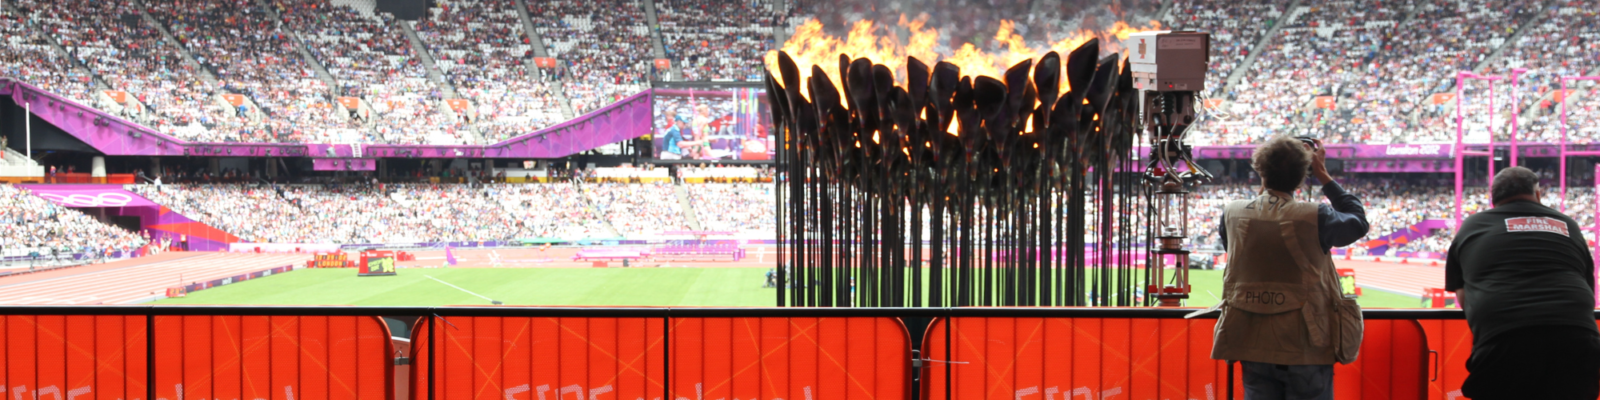 ZND Barriers in the Olympic Stadium with the Olympic Flame in view